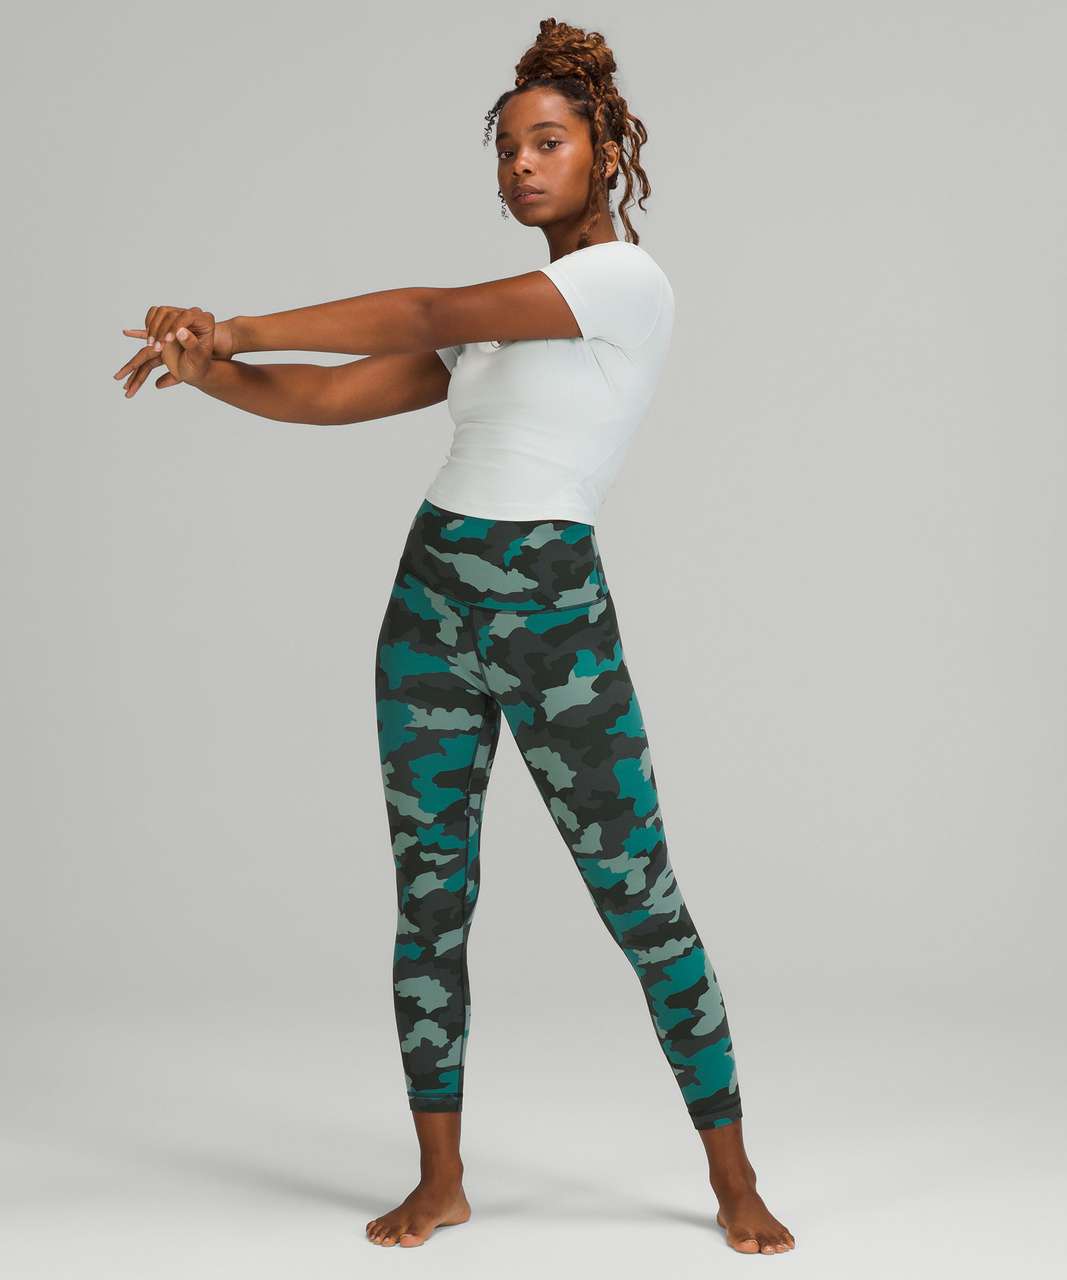 Lululemon Align Pant II 25 - Incognito Camo Pink Taupe Multi